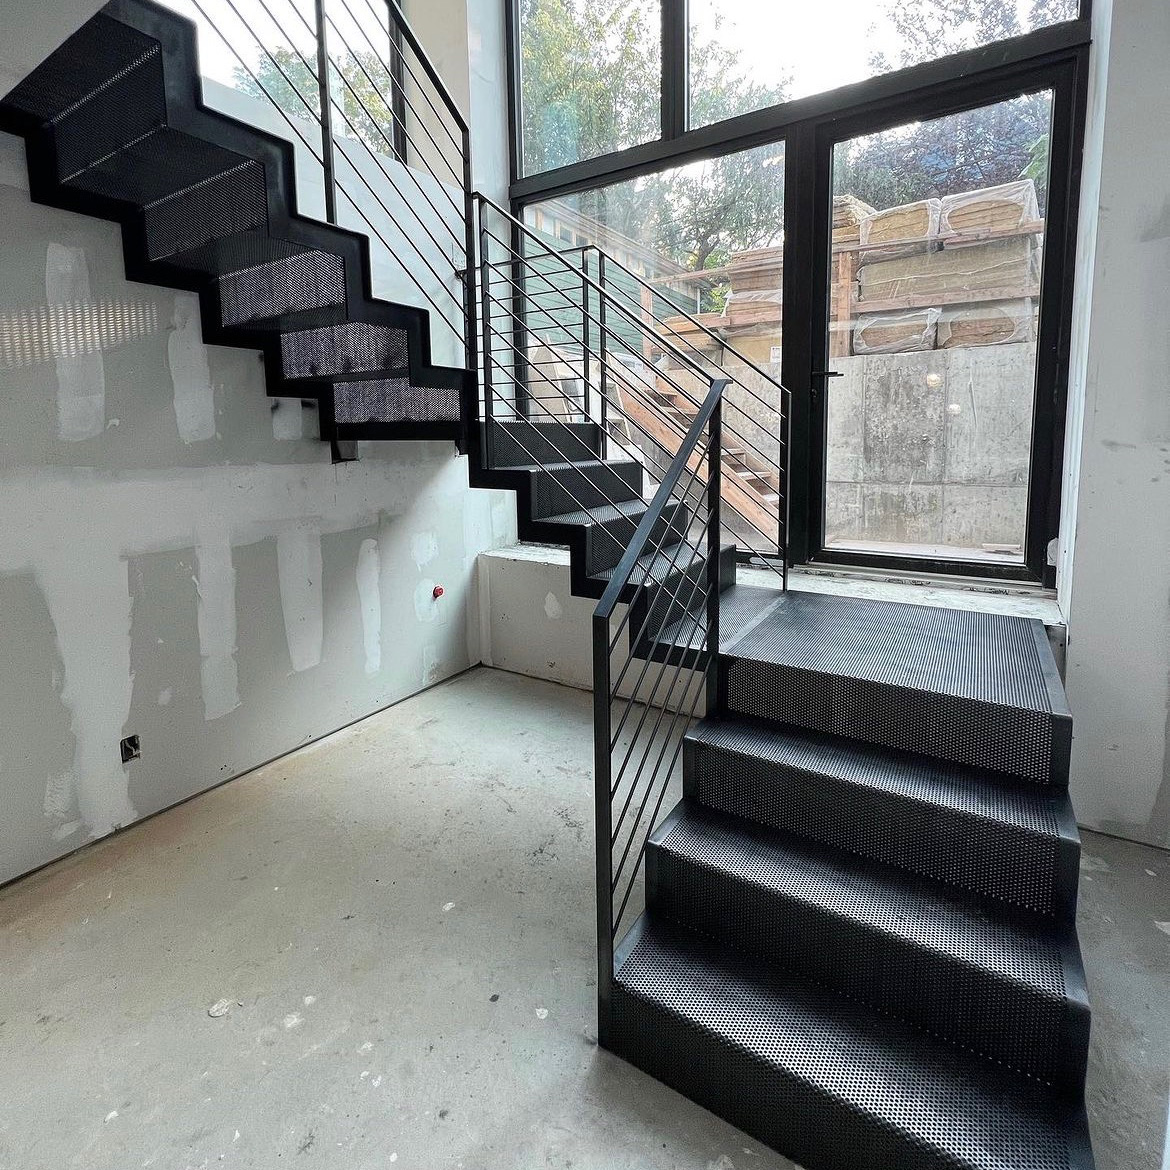 Thank you @ironandadwire for a beautiful install of this blackened steel stair. #ZHarchitects #Architecture #Moderndesign #highendresidential #NYC #Passivehouse #summer projects